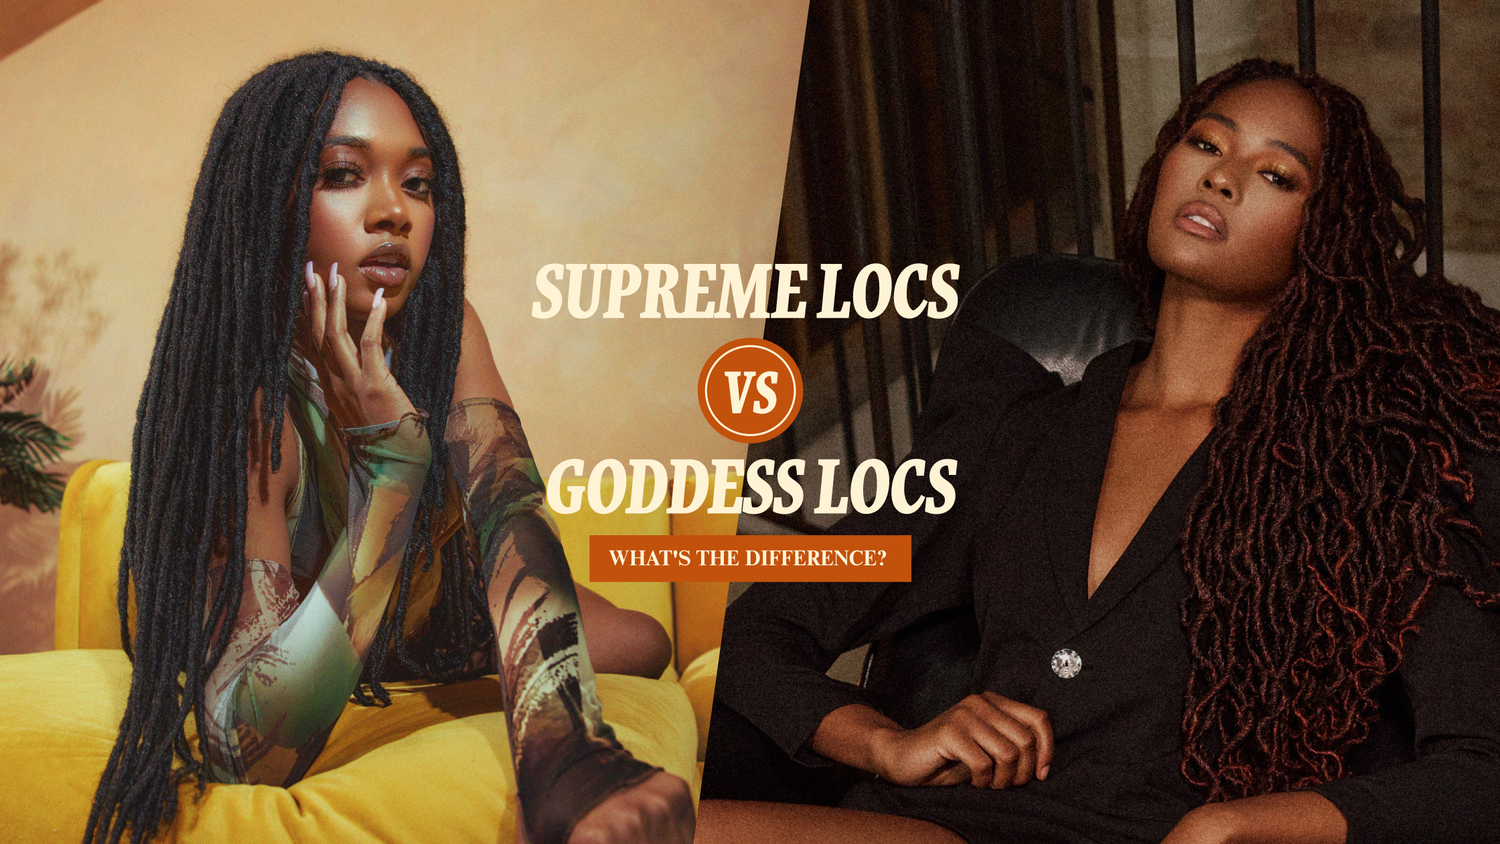 SUPREME VS GODDESS: What's The Difference?